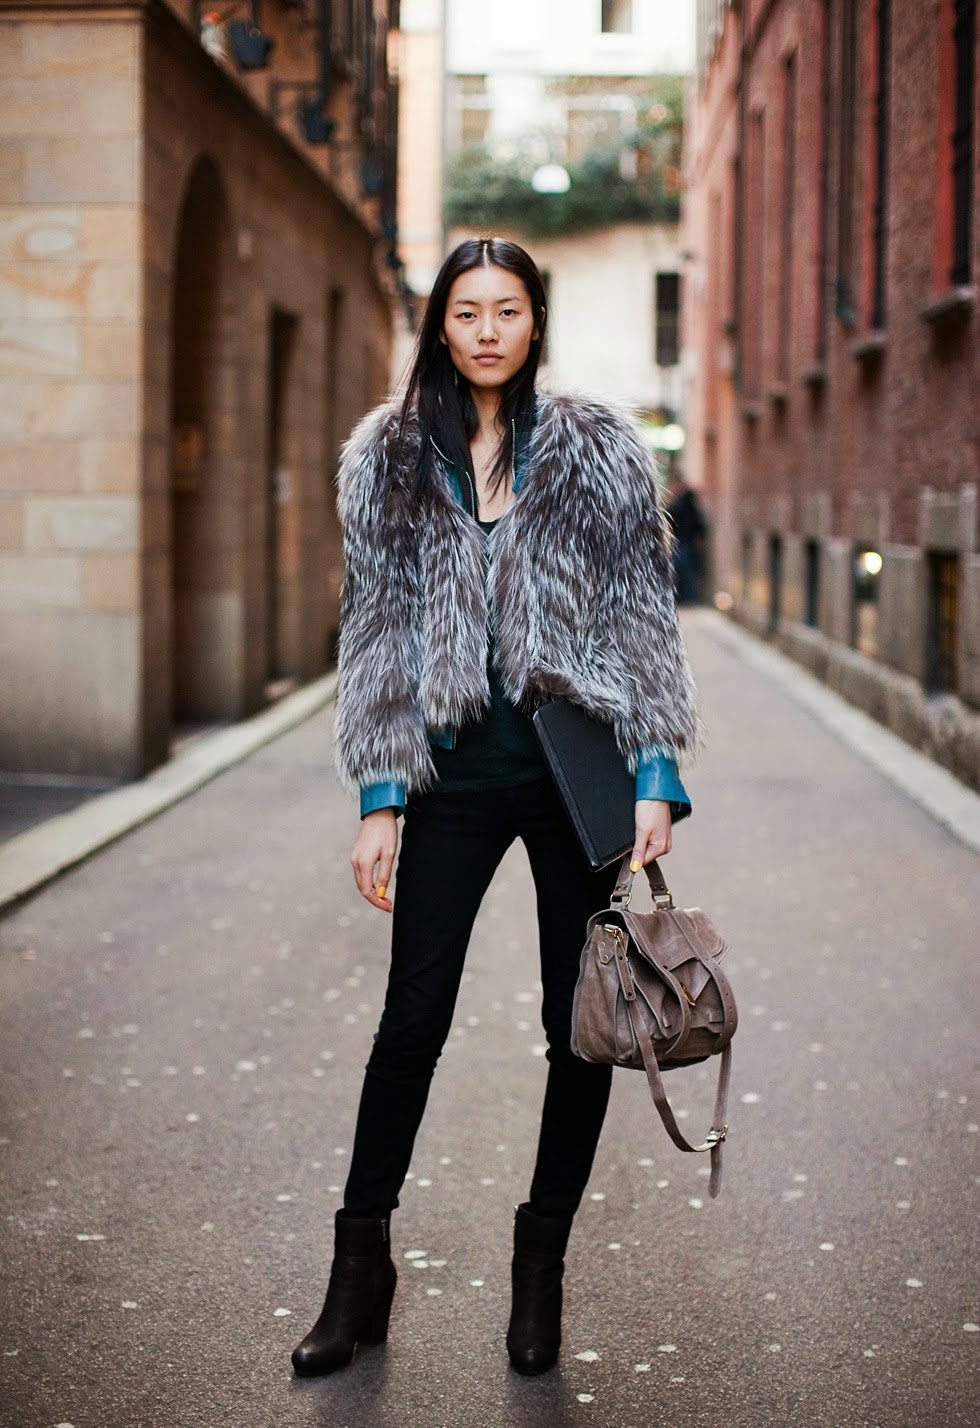 Just Smile With Style: What To Wear With A Fur Coat